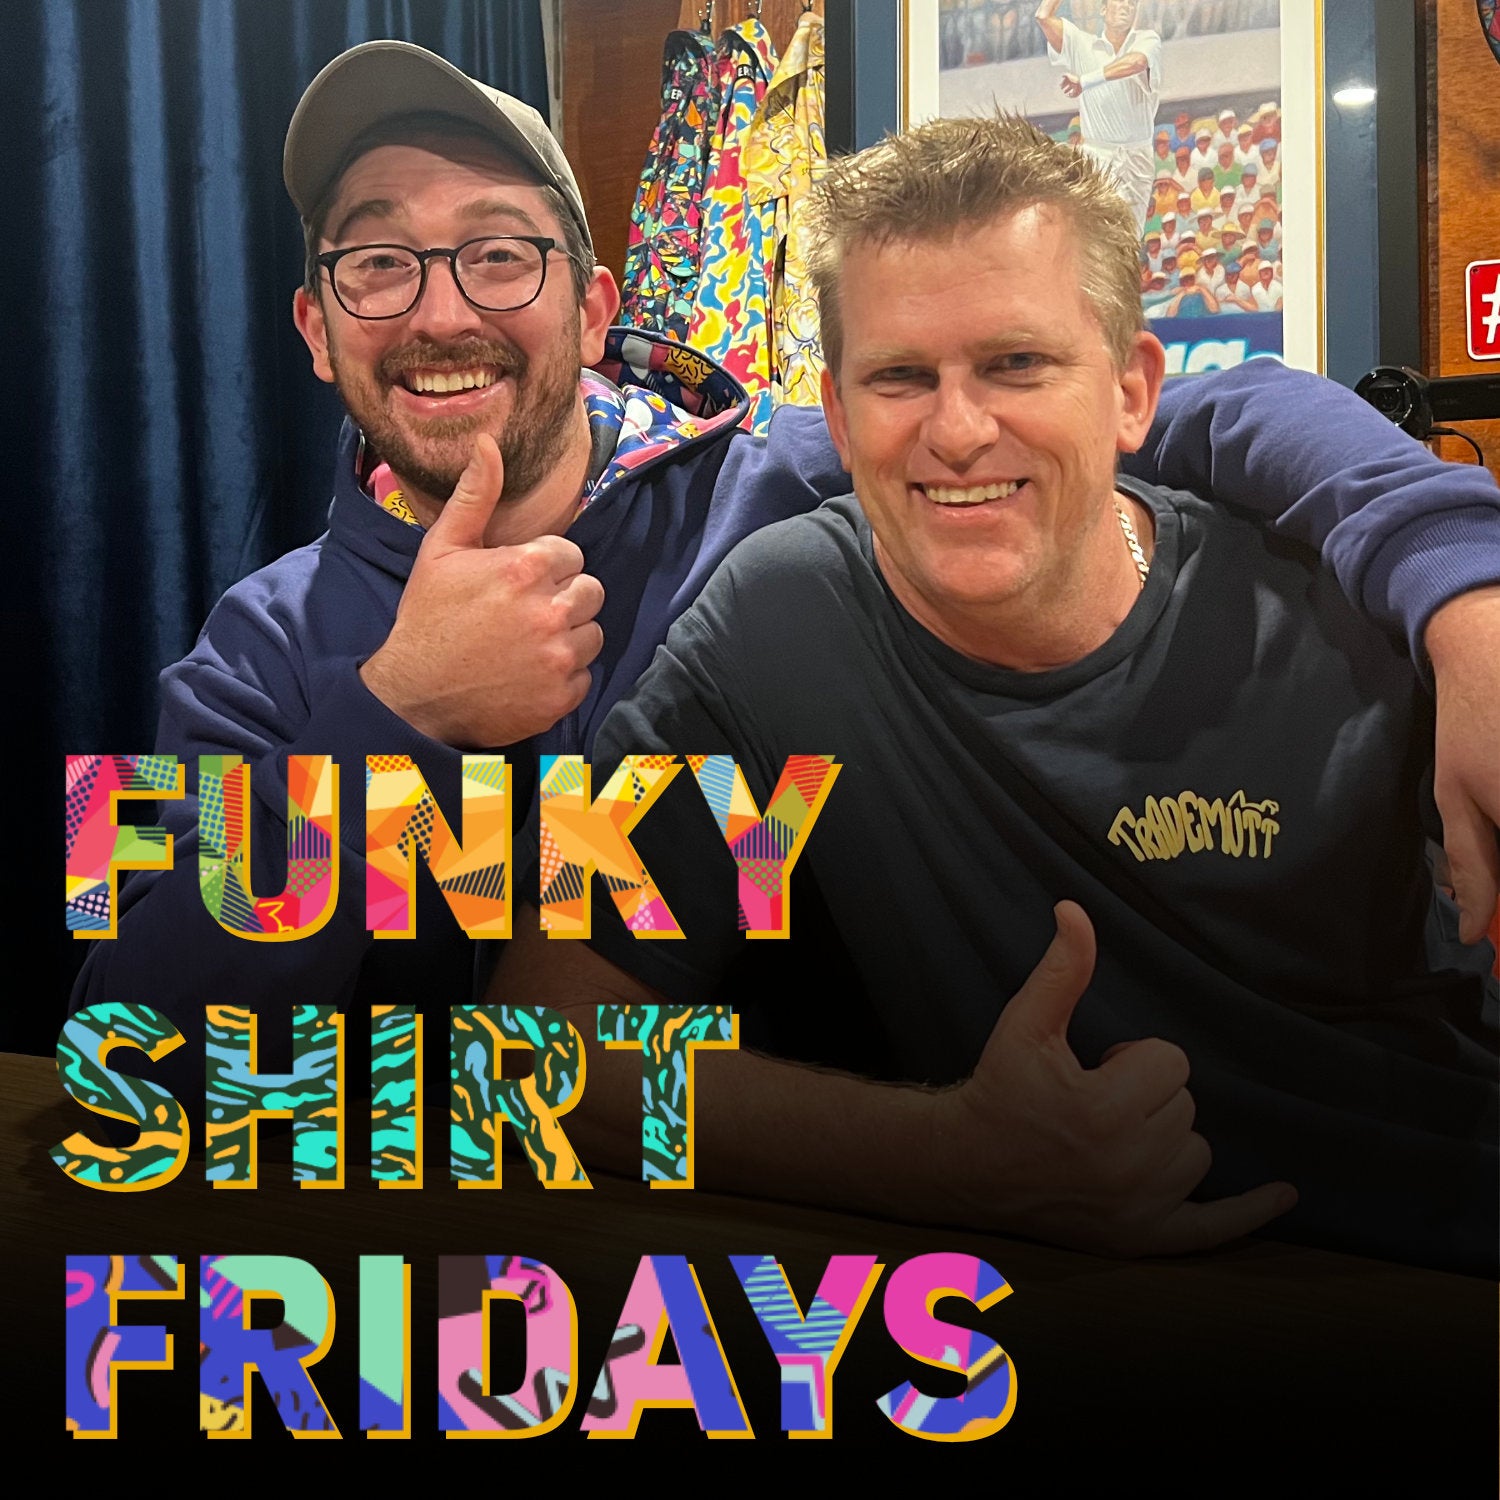 Funky Shirt Fridays: Ep. 7 - A Succulent Chinese Meal